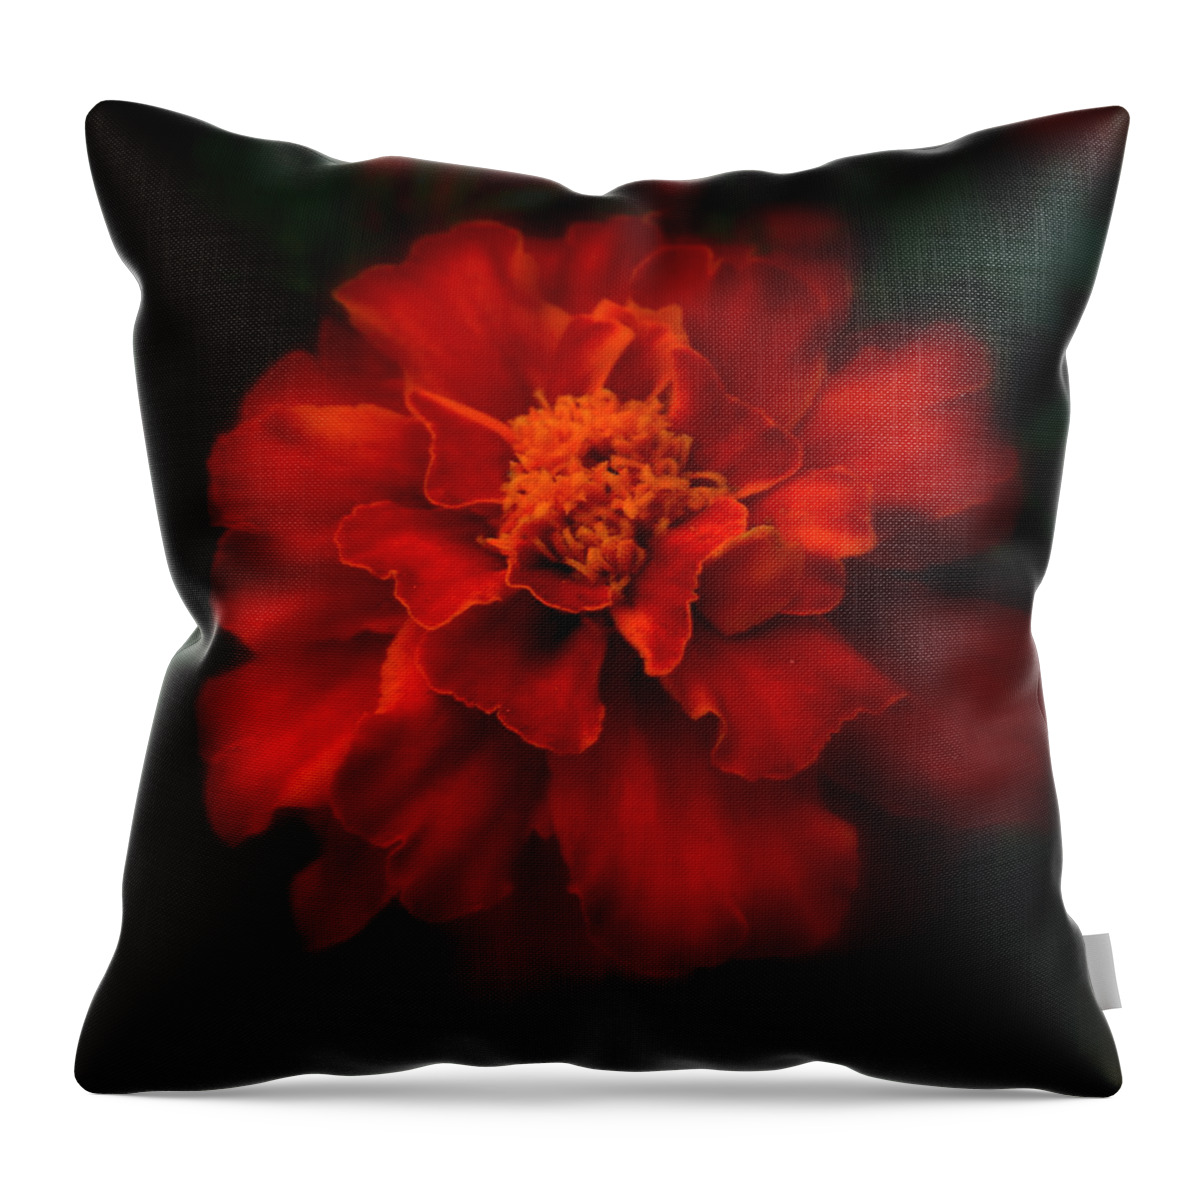 Marigold Throw Pillow featuring the photograph Blazing Marigold by Diannah Lynch